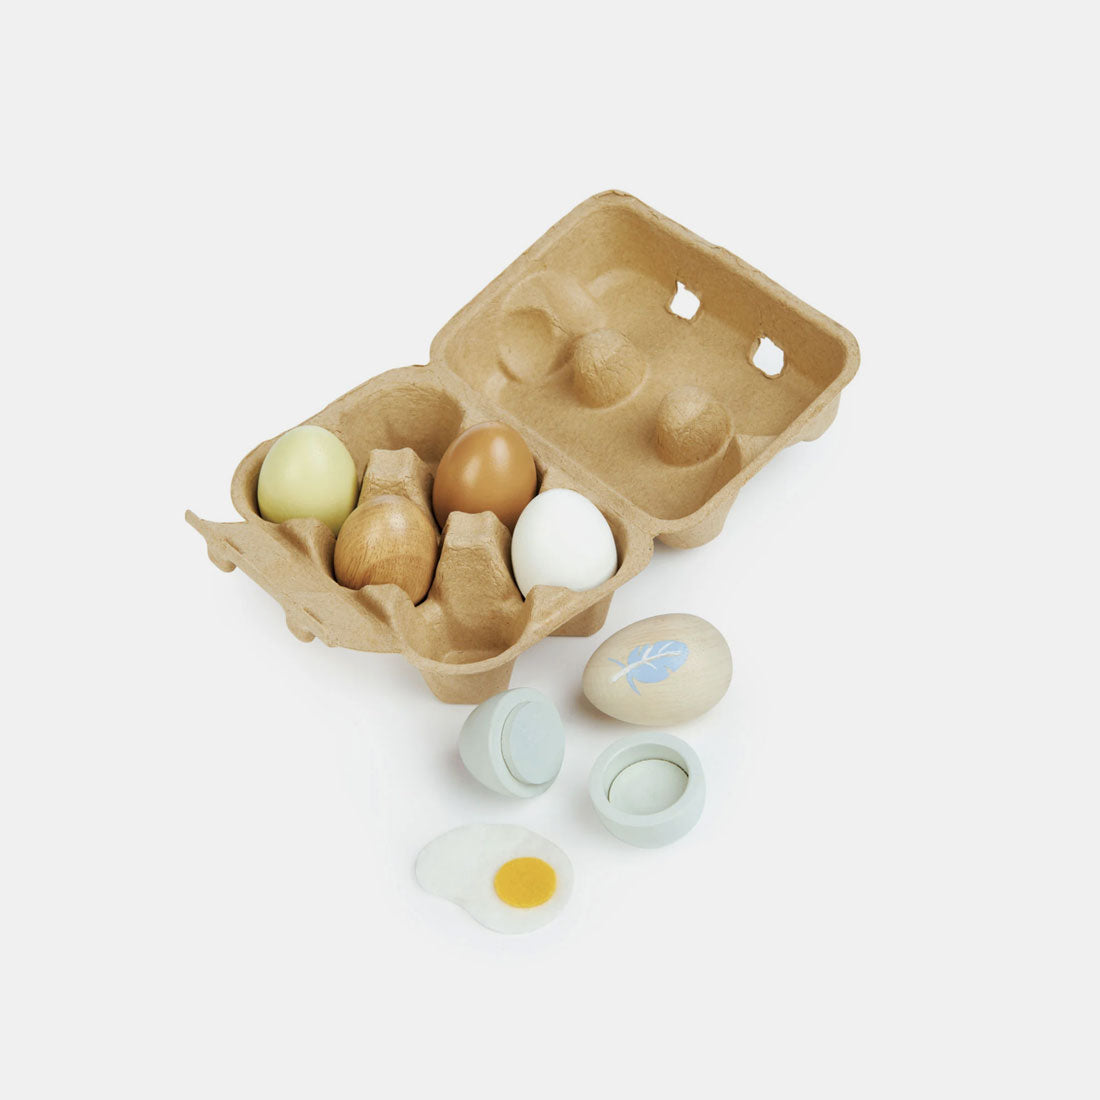 Wooden Play Food - Eggs in Carton